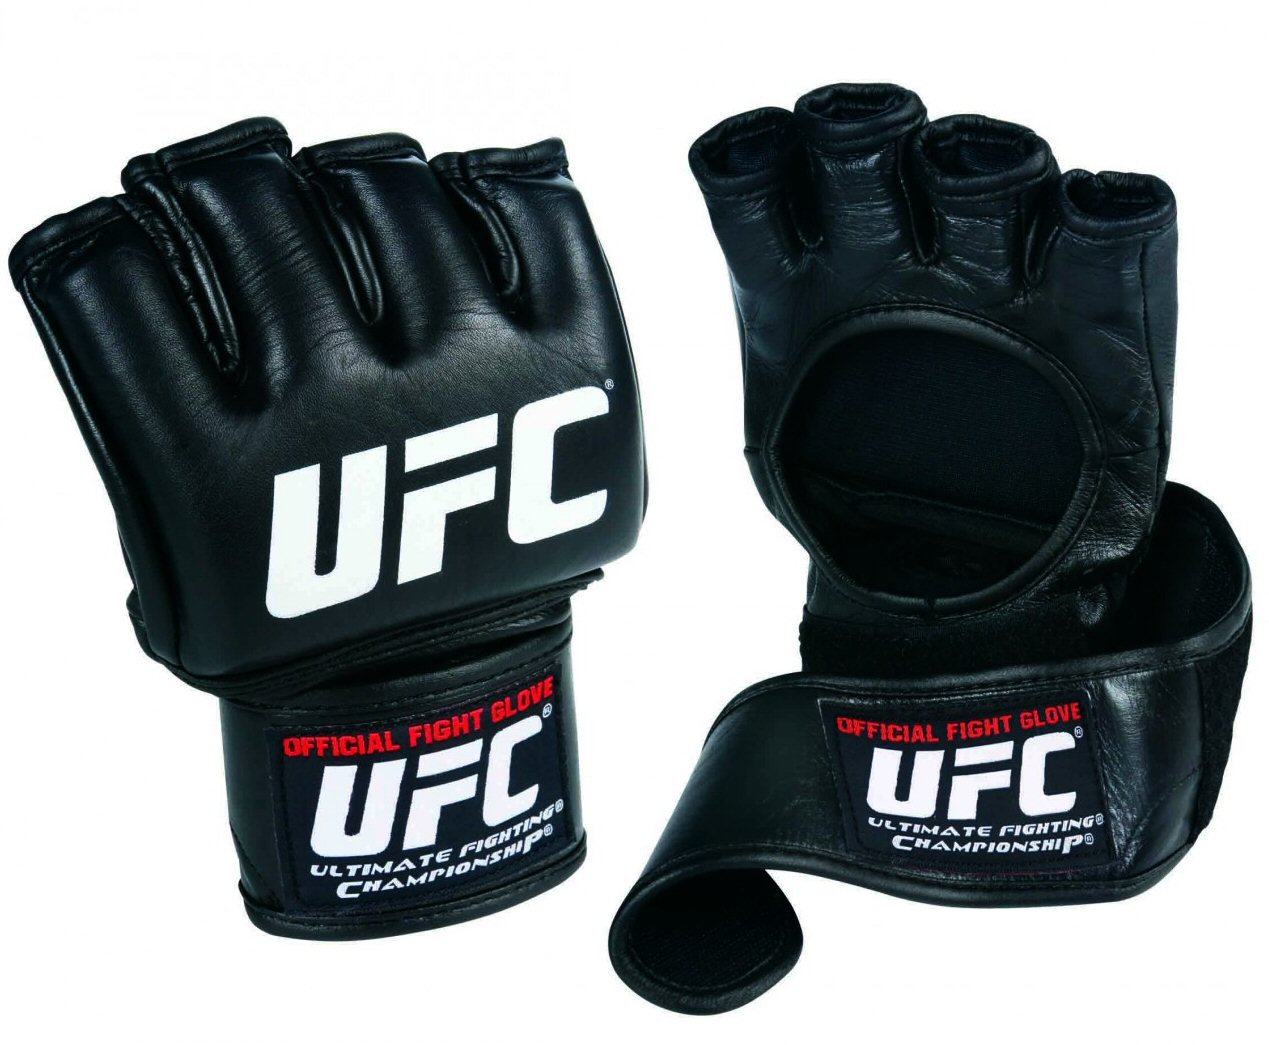 ufc-official-fight-gloves-mma-gloves